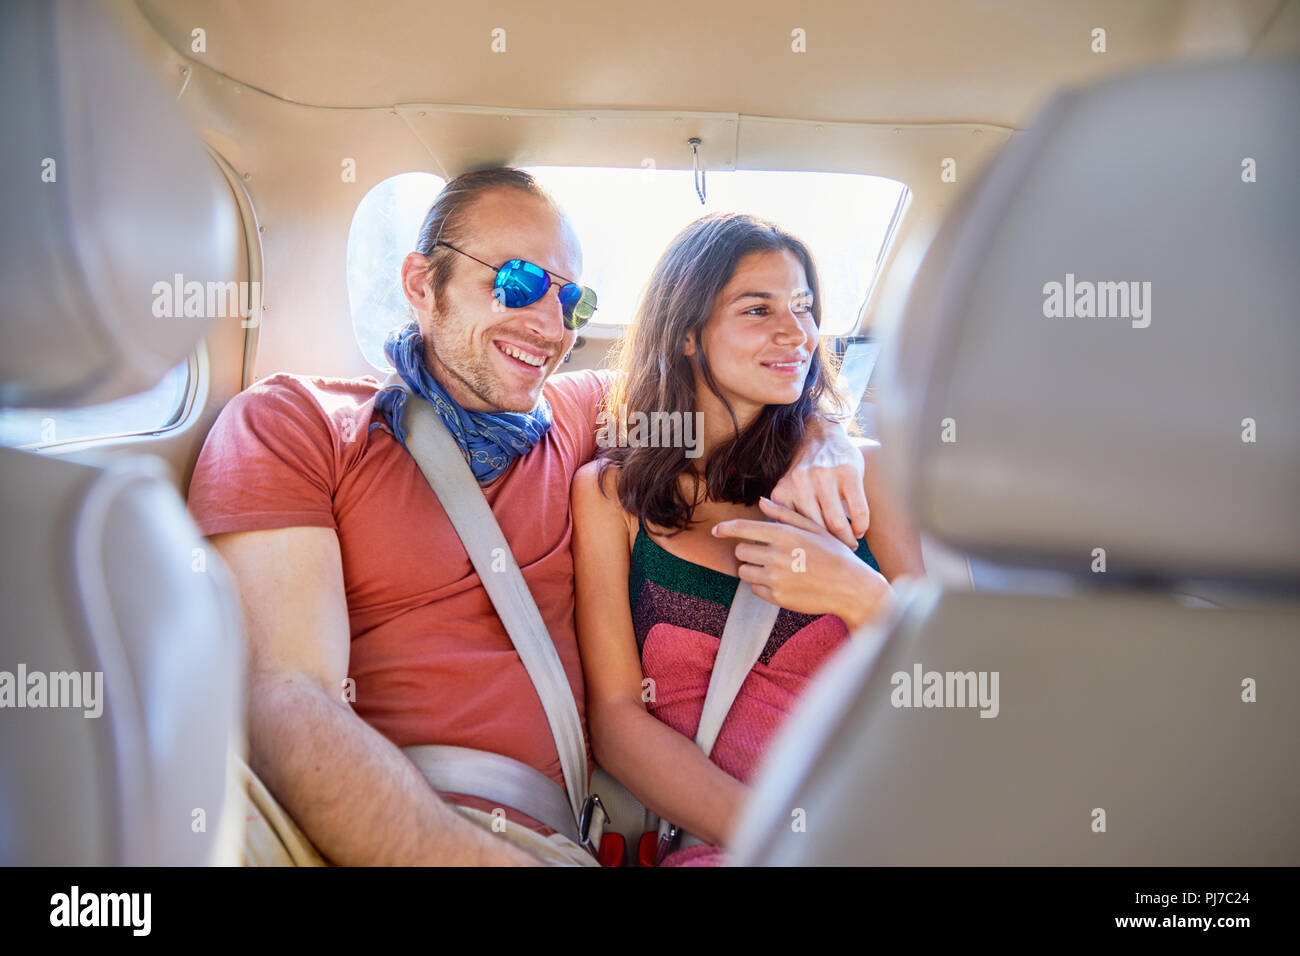 Friends riding in back seat of car Banque D'Images